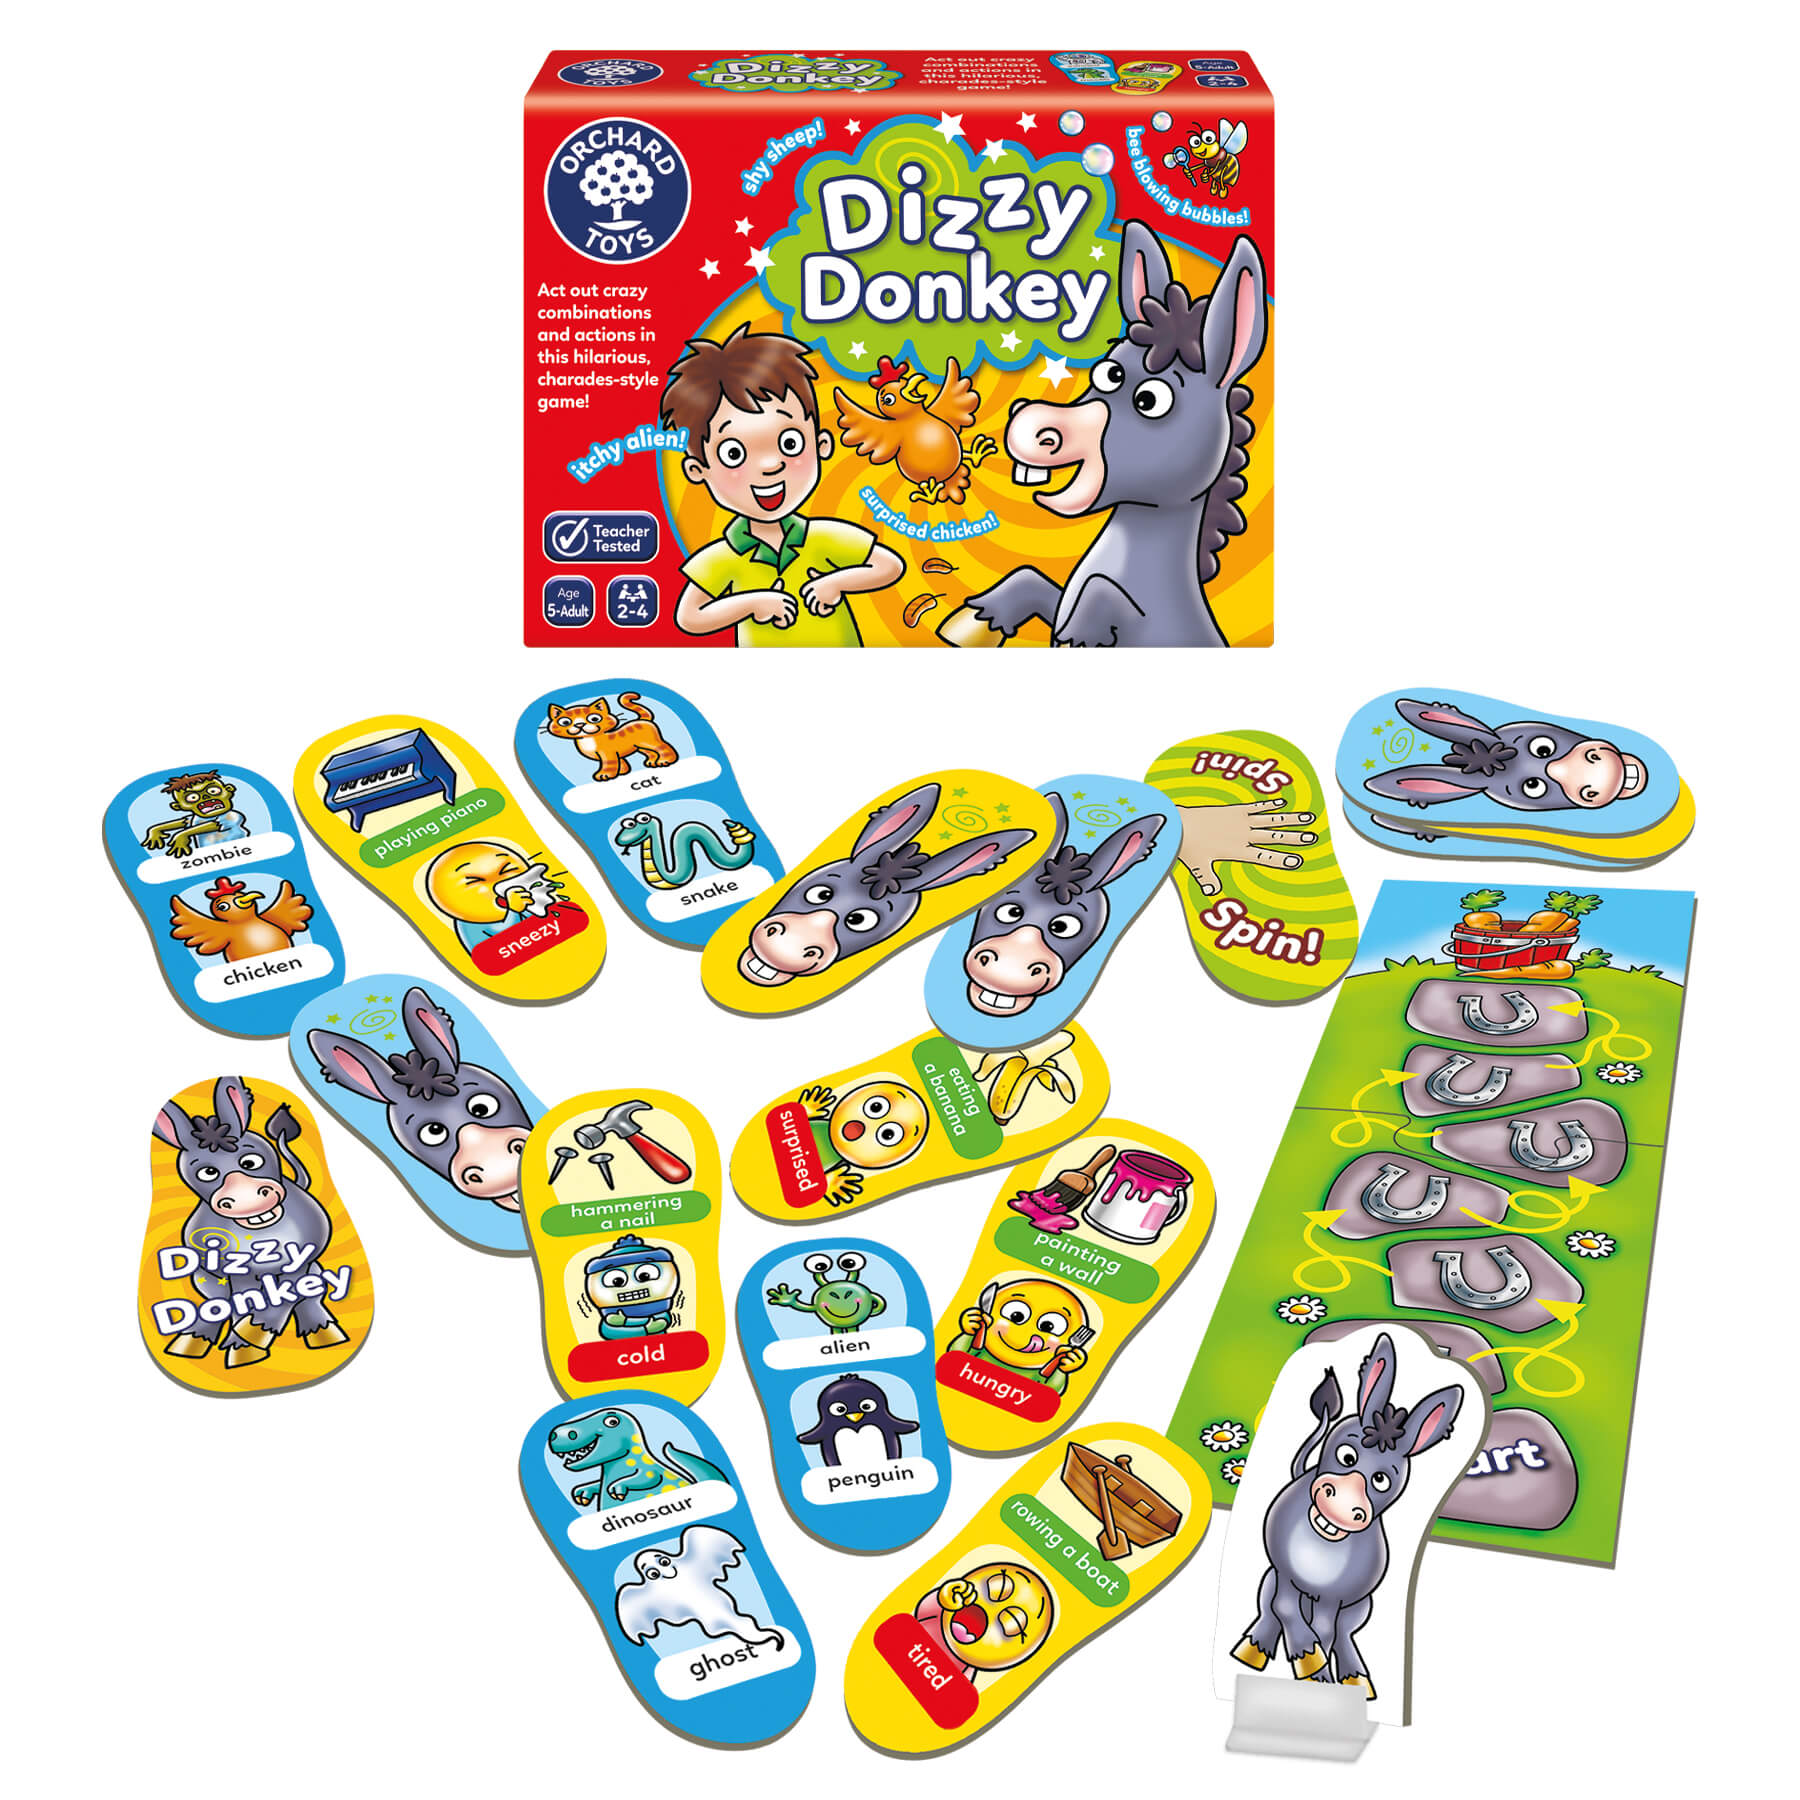 orchard toys - contents of dizzy donkey